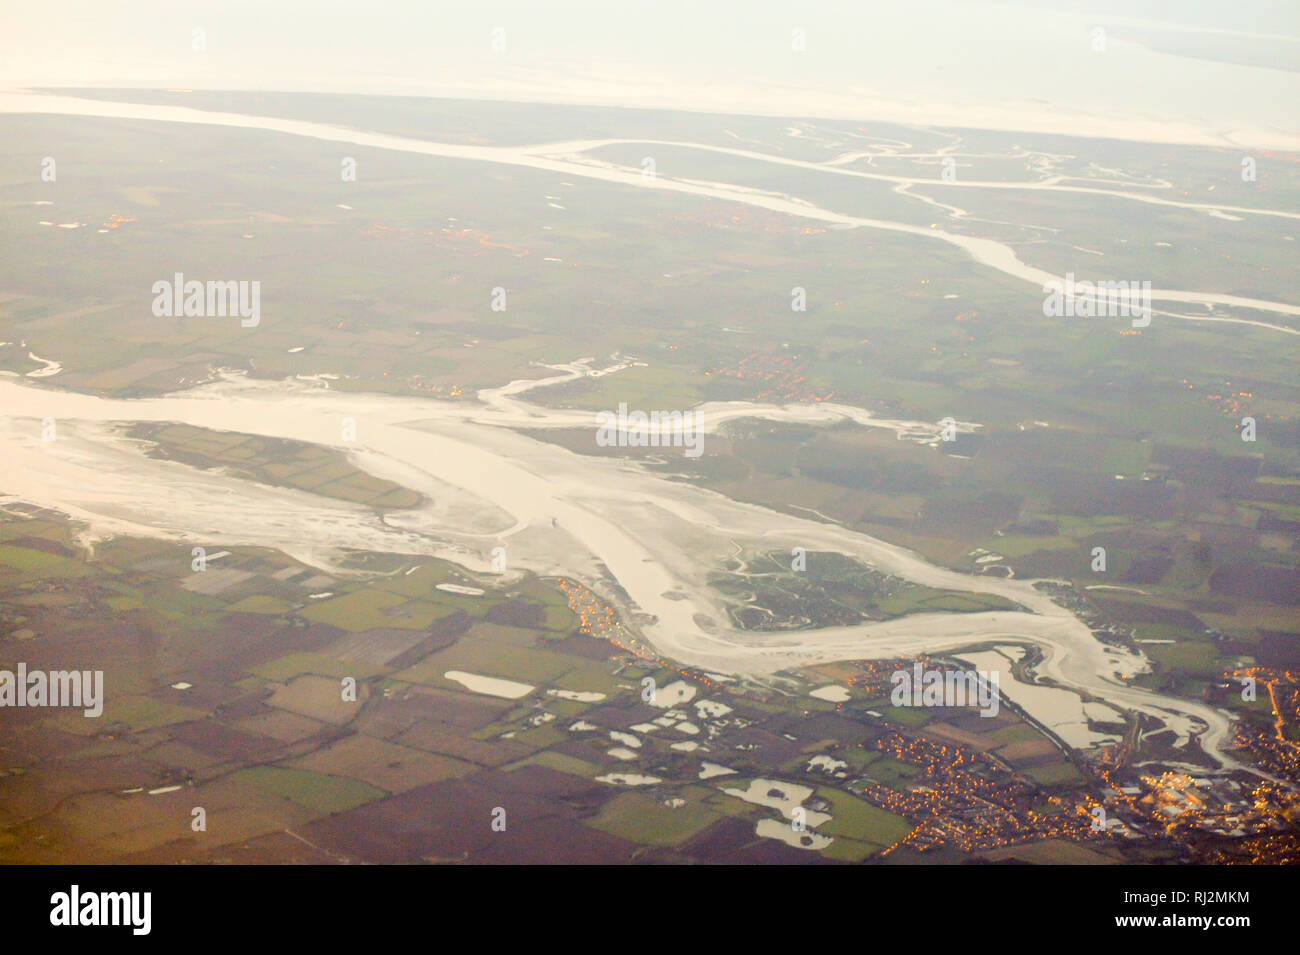 Great Britain from above. October 29th 2008 © Wojciech Strozyk / Alamy Stock Photo Stock Photo